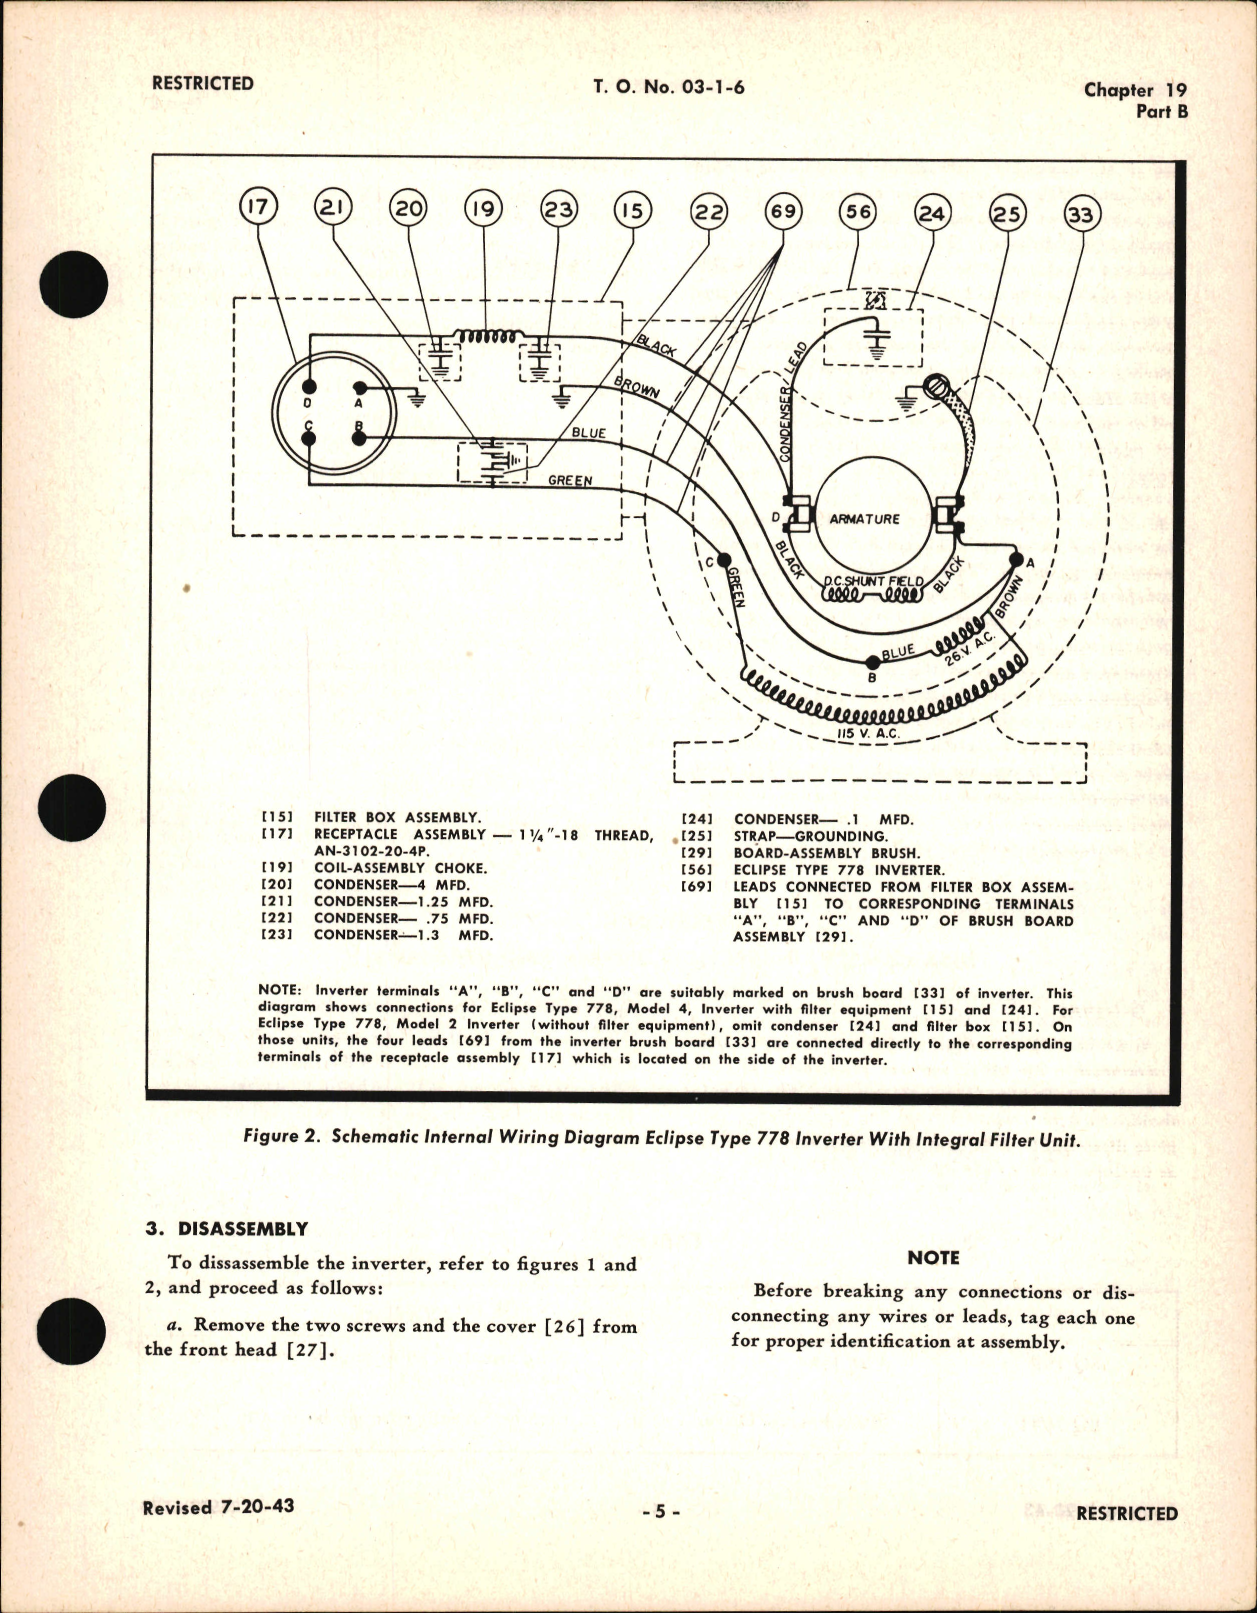 Sample page 5 from AirCorps Library document: Overhaul Instructions for Type 778 Inverters